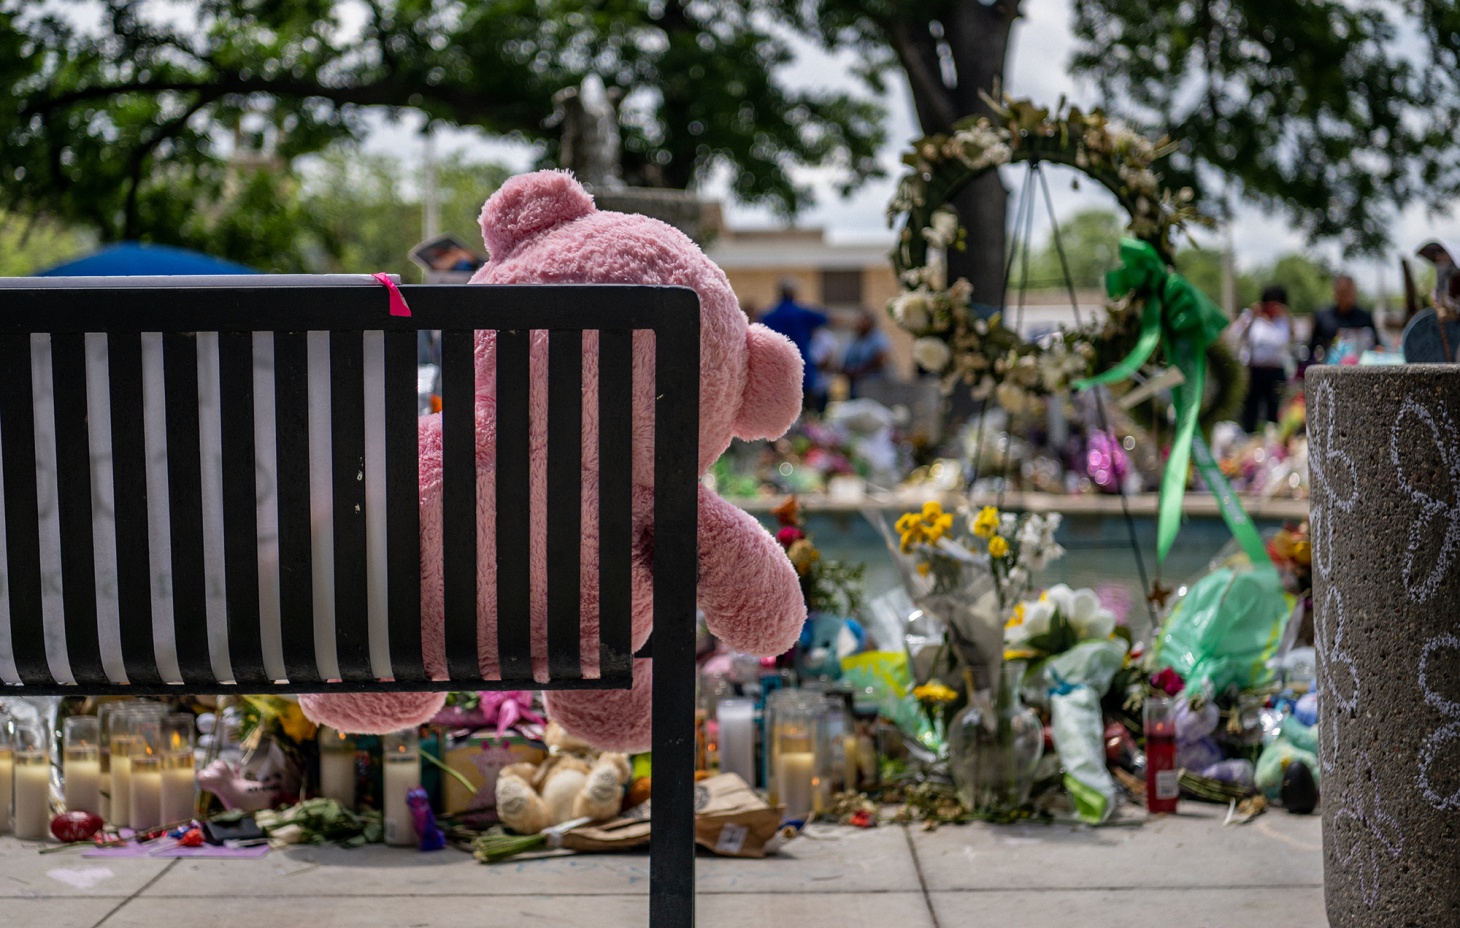 A teddy bear on a bench at a memorial dedicated to those murdered on May 24 during the mass shooting at Robb Elementary School, in Uvalde, Texas